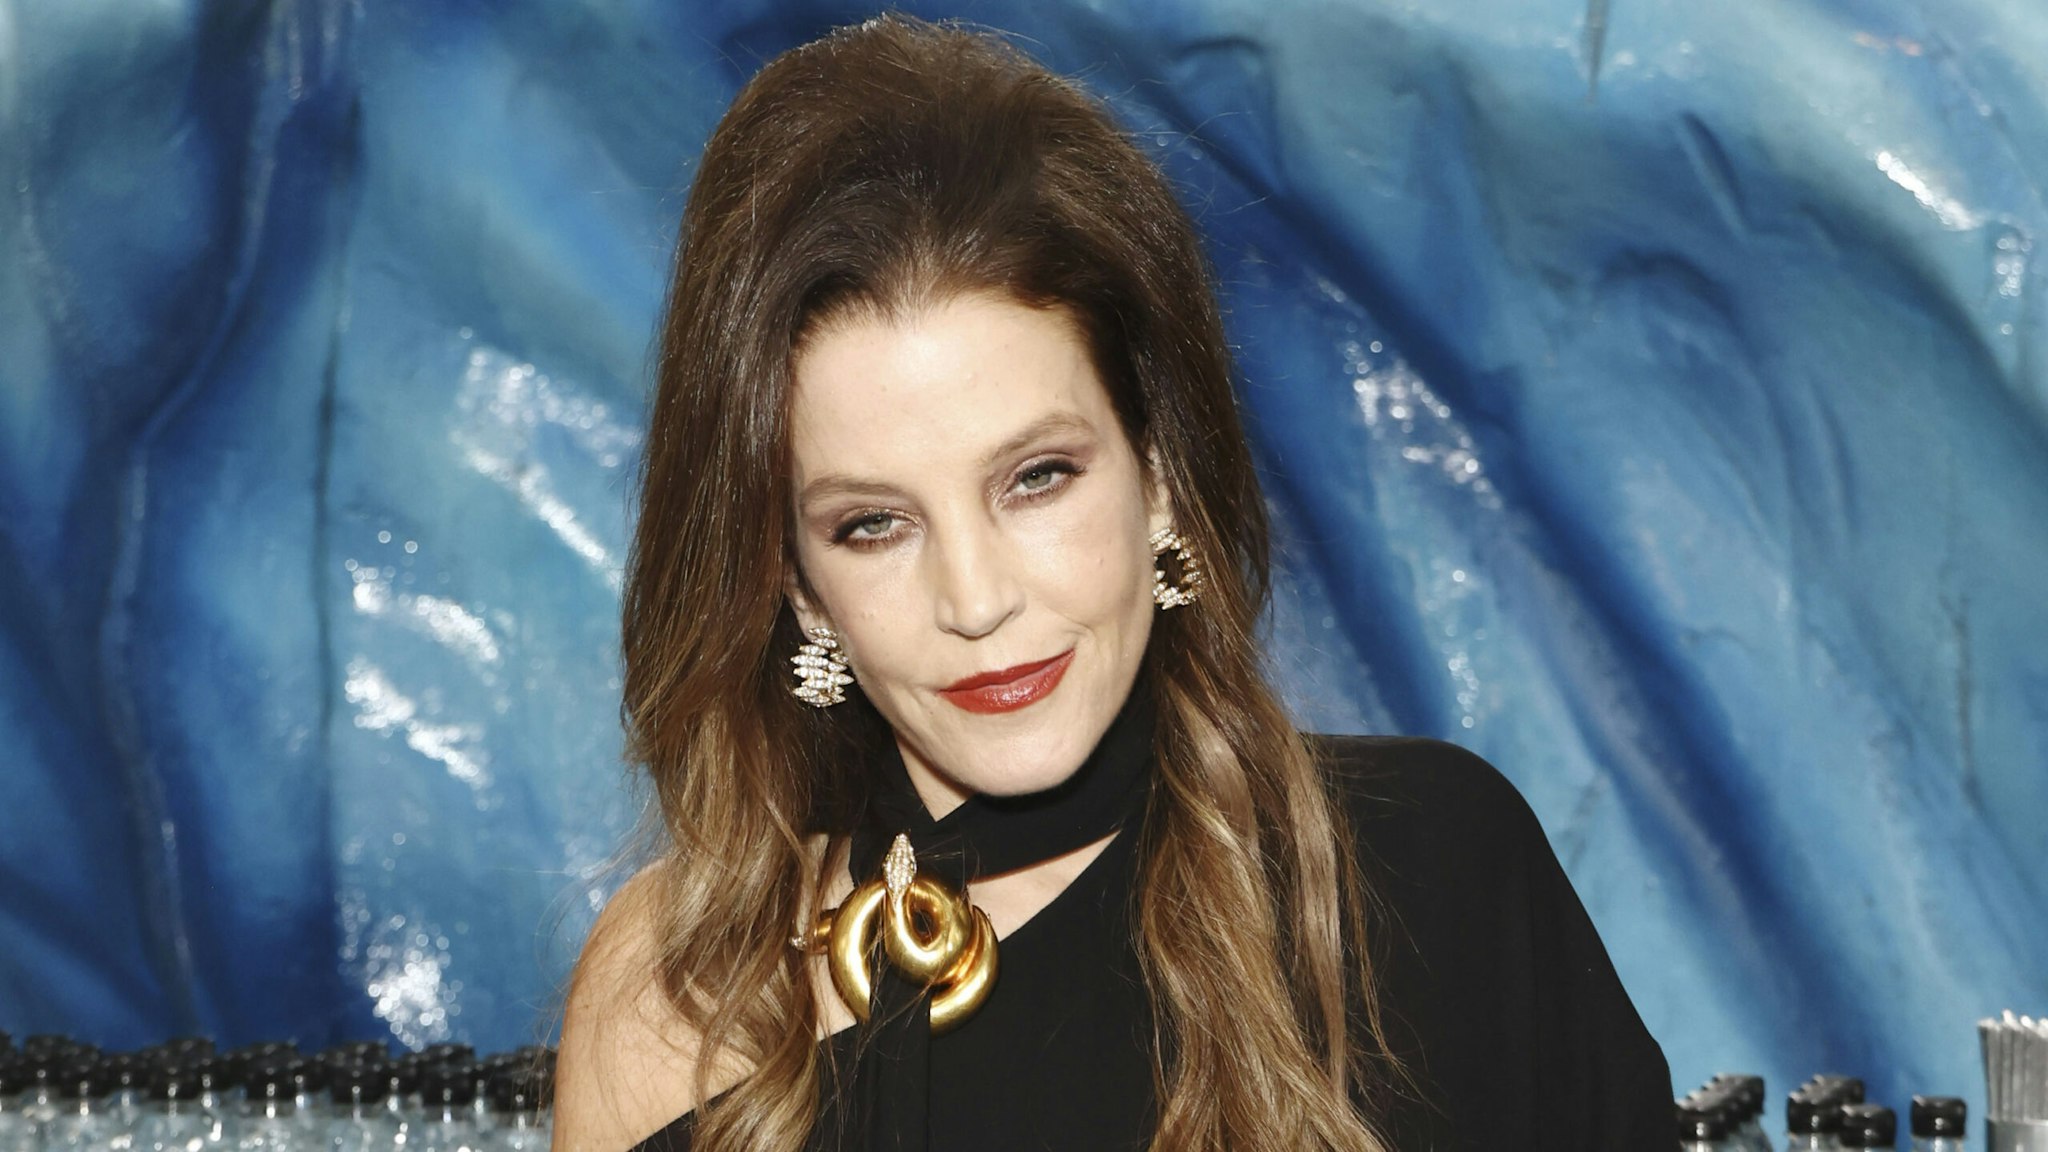 BEVERLY HILLS, CALIFORNIA - JANUARY 10: Lisa Marie Presley with Icelandic Glacial at the 80th Annual Golden Globe Awards at The Beverly Hilton on January 10, 2023 in Beverly Hills, California.